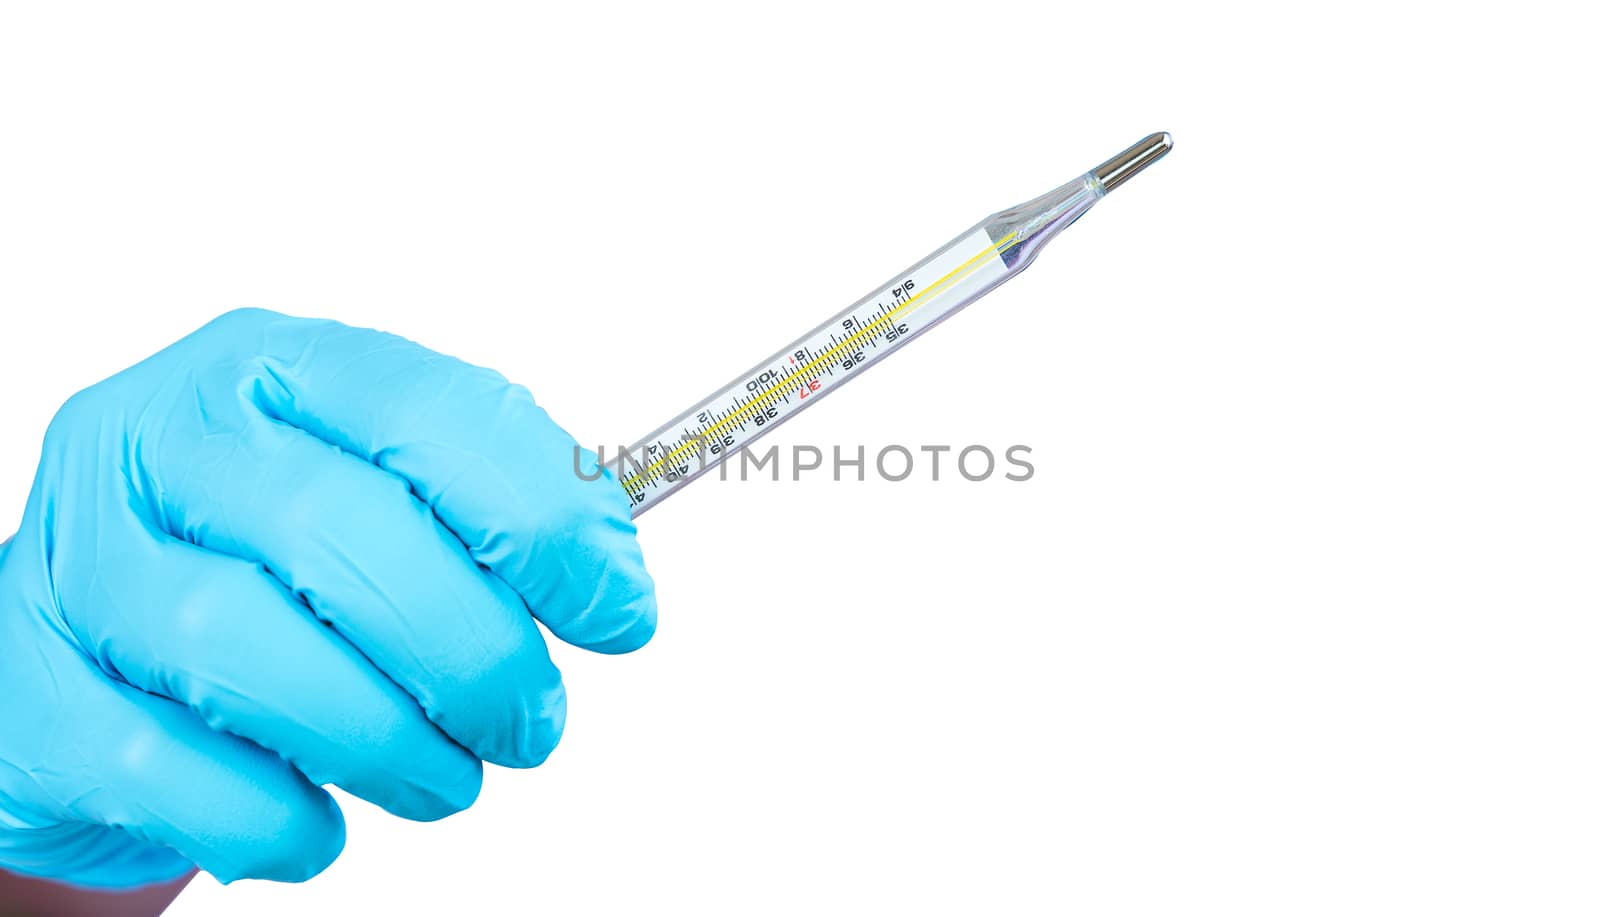 The doctor's hand is holding mercury to measure fever dicut isol by Boophuket